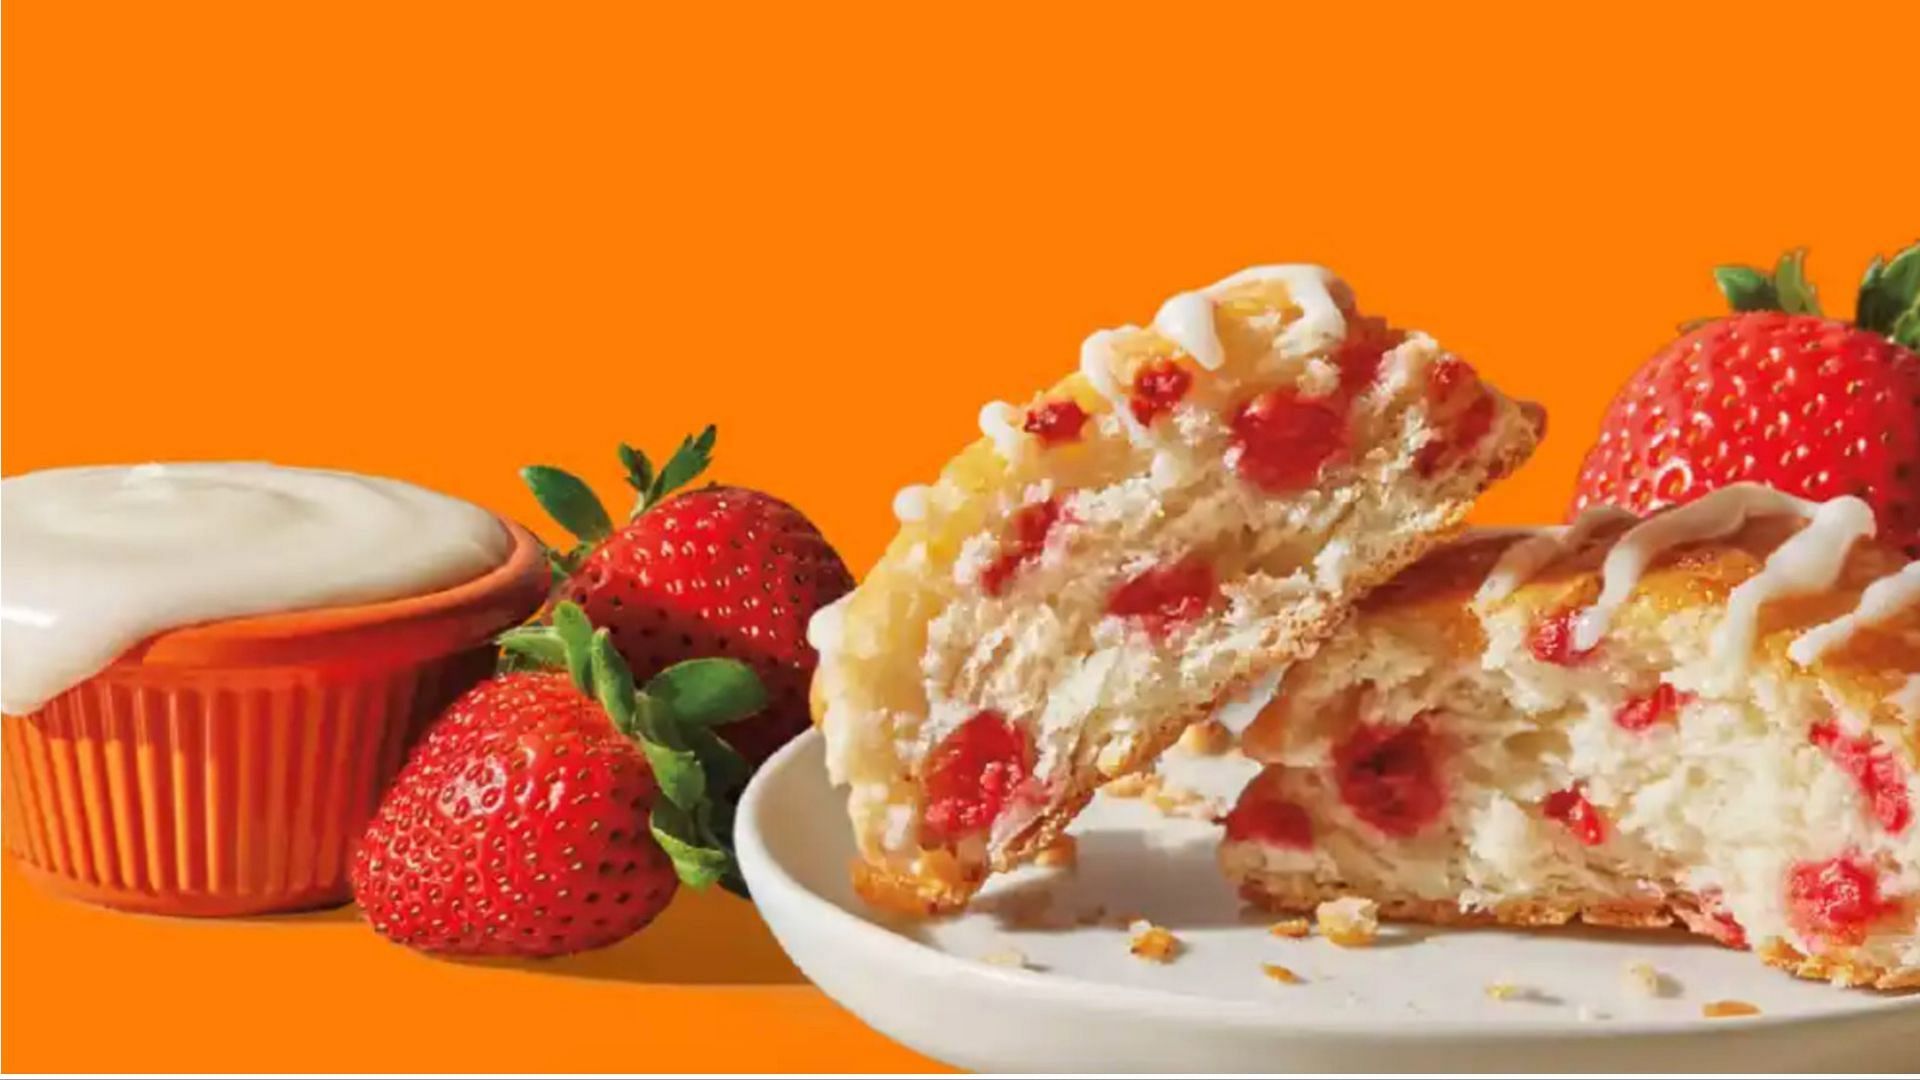 the new Strawberry Biscuits fuse together the fruity goodness of Strawberries and the chain&#039;s signature biscuits (Image via Popeyes)